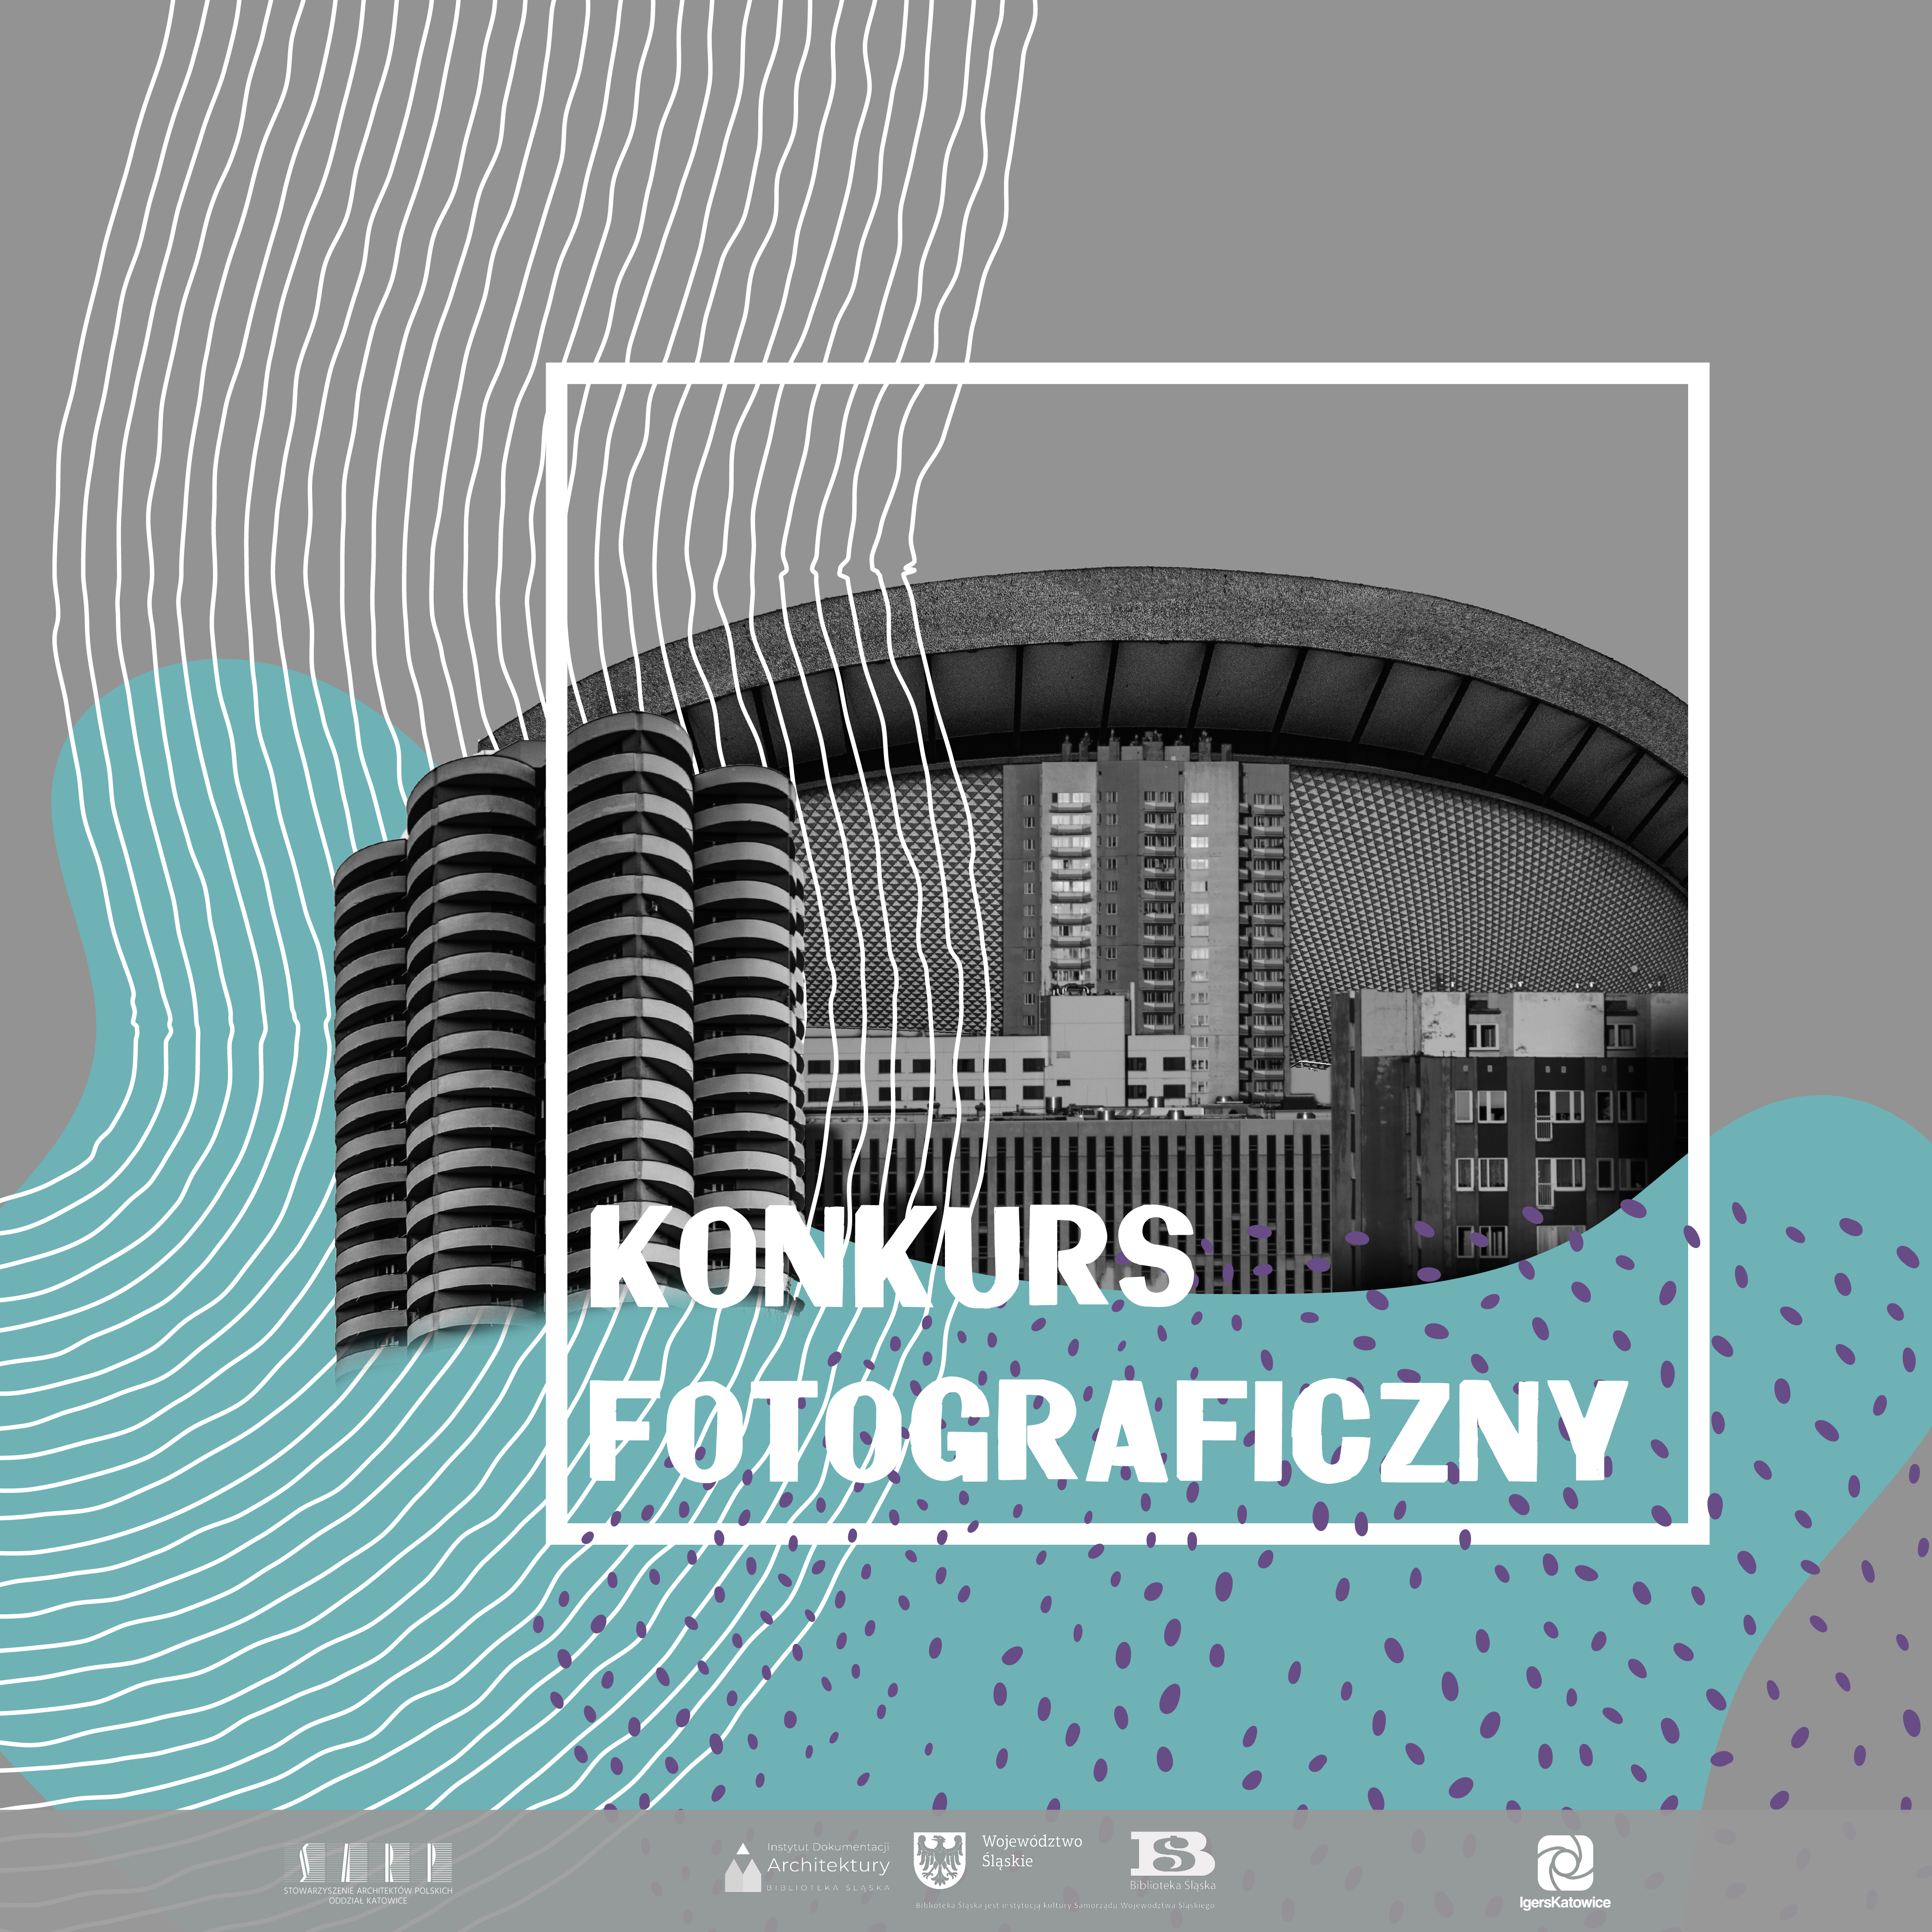 Logo of the photography contest